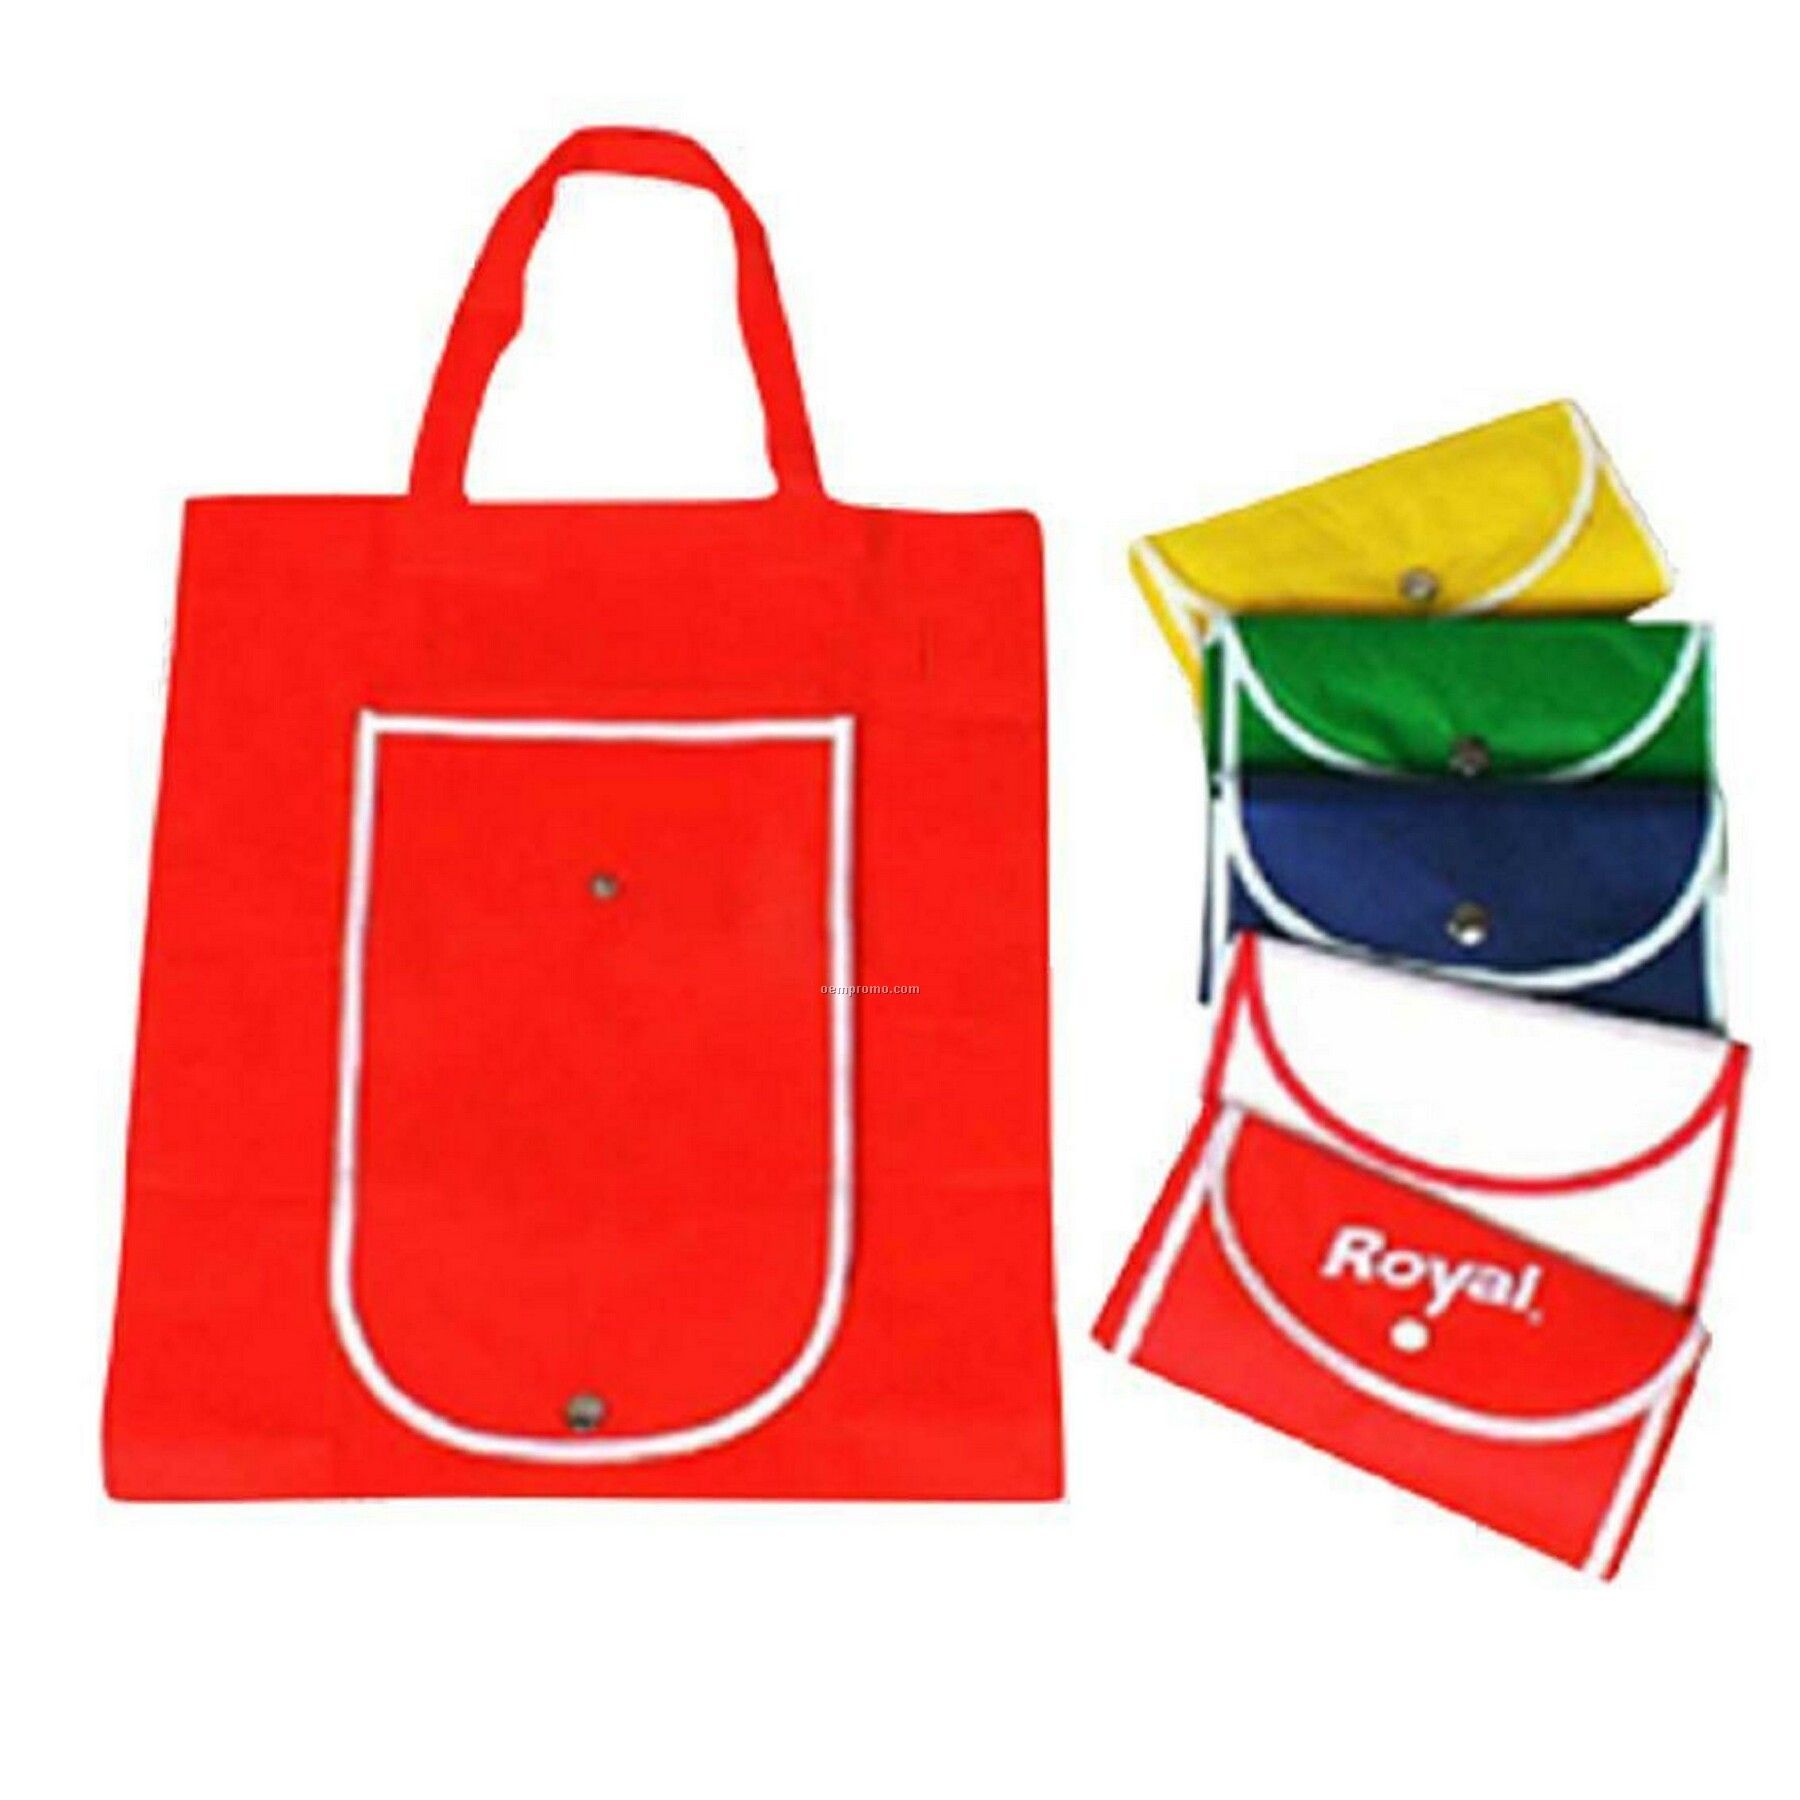 High Quality Non Woven Tote Bag. 80 Gsm Fabric, Measures 15"W X 16"H X 4"D